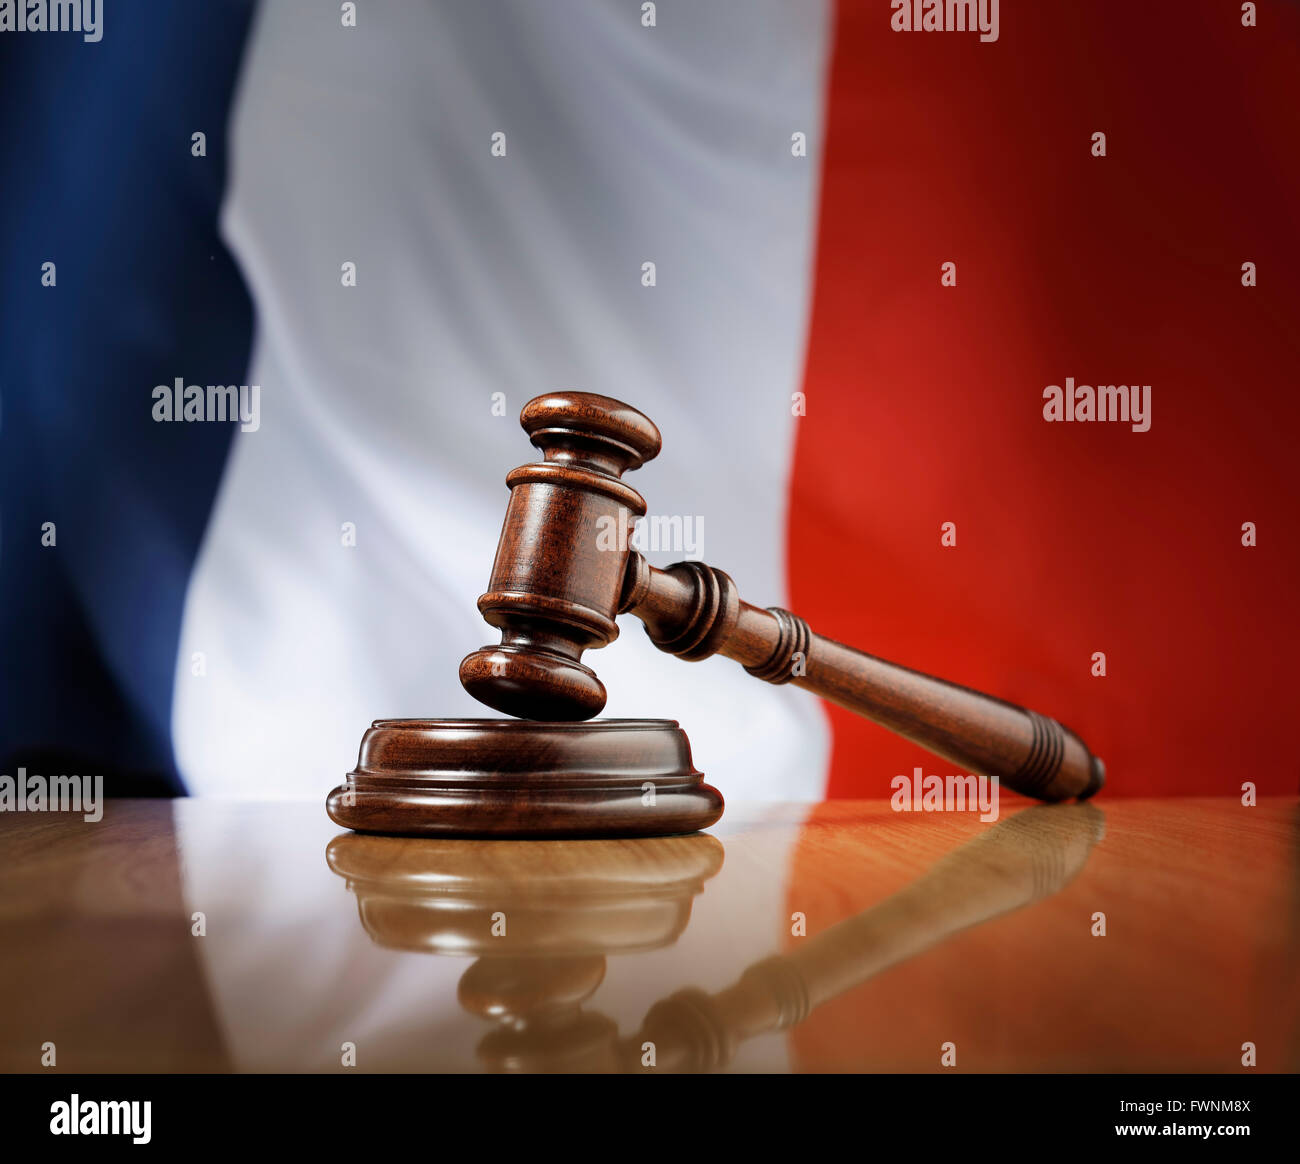 Mahogany wooden gavel on glossy wooden table, flag of France in the background. Stock Photo